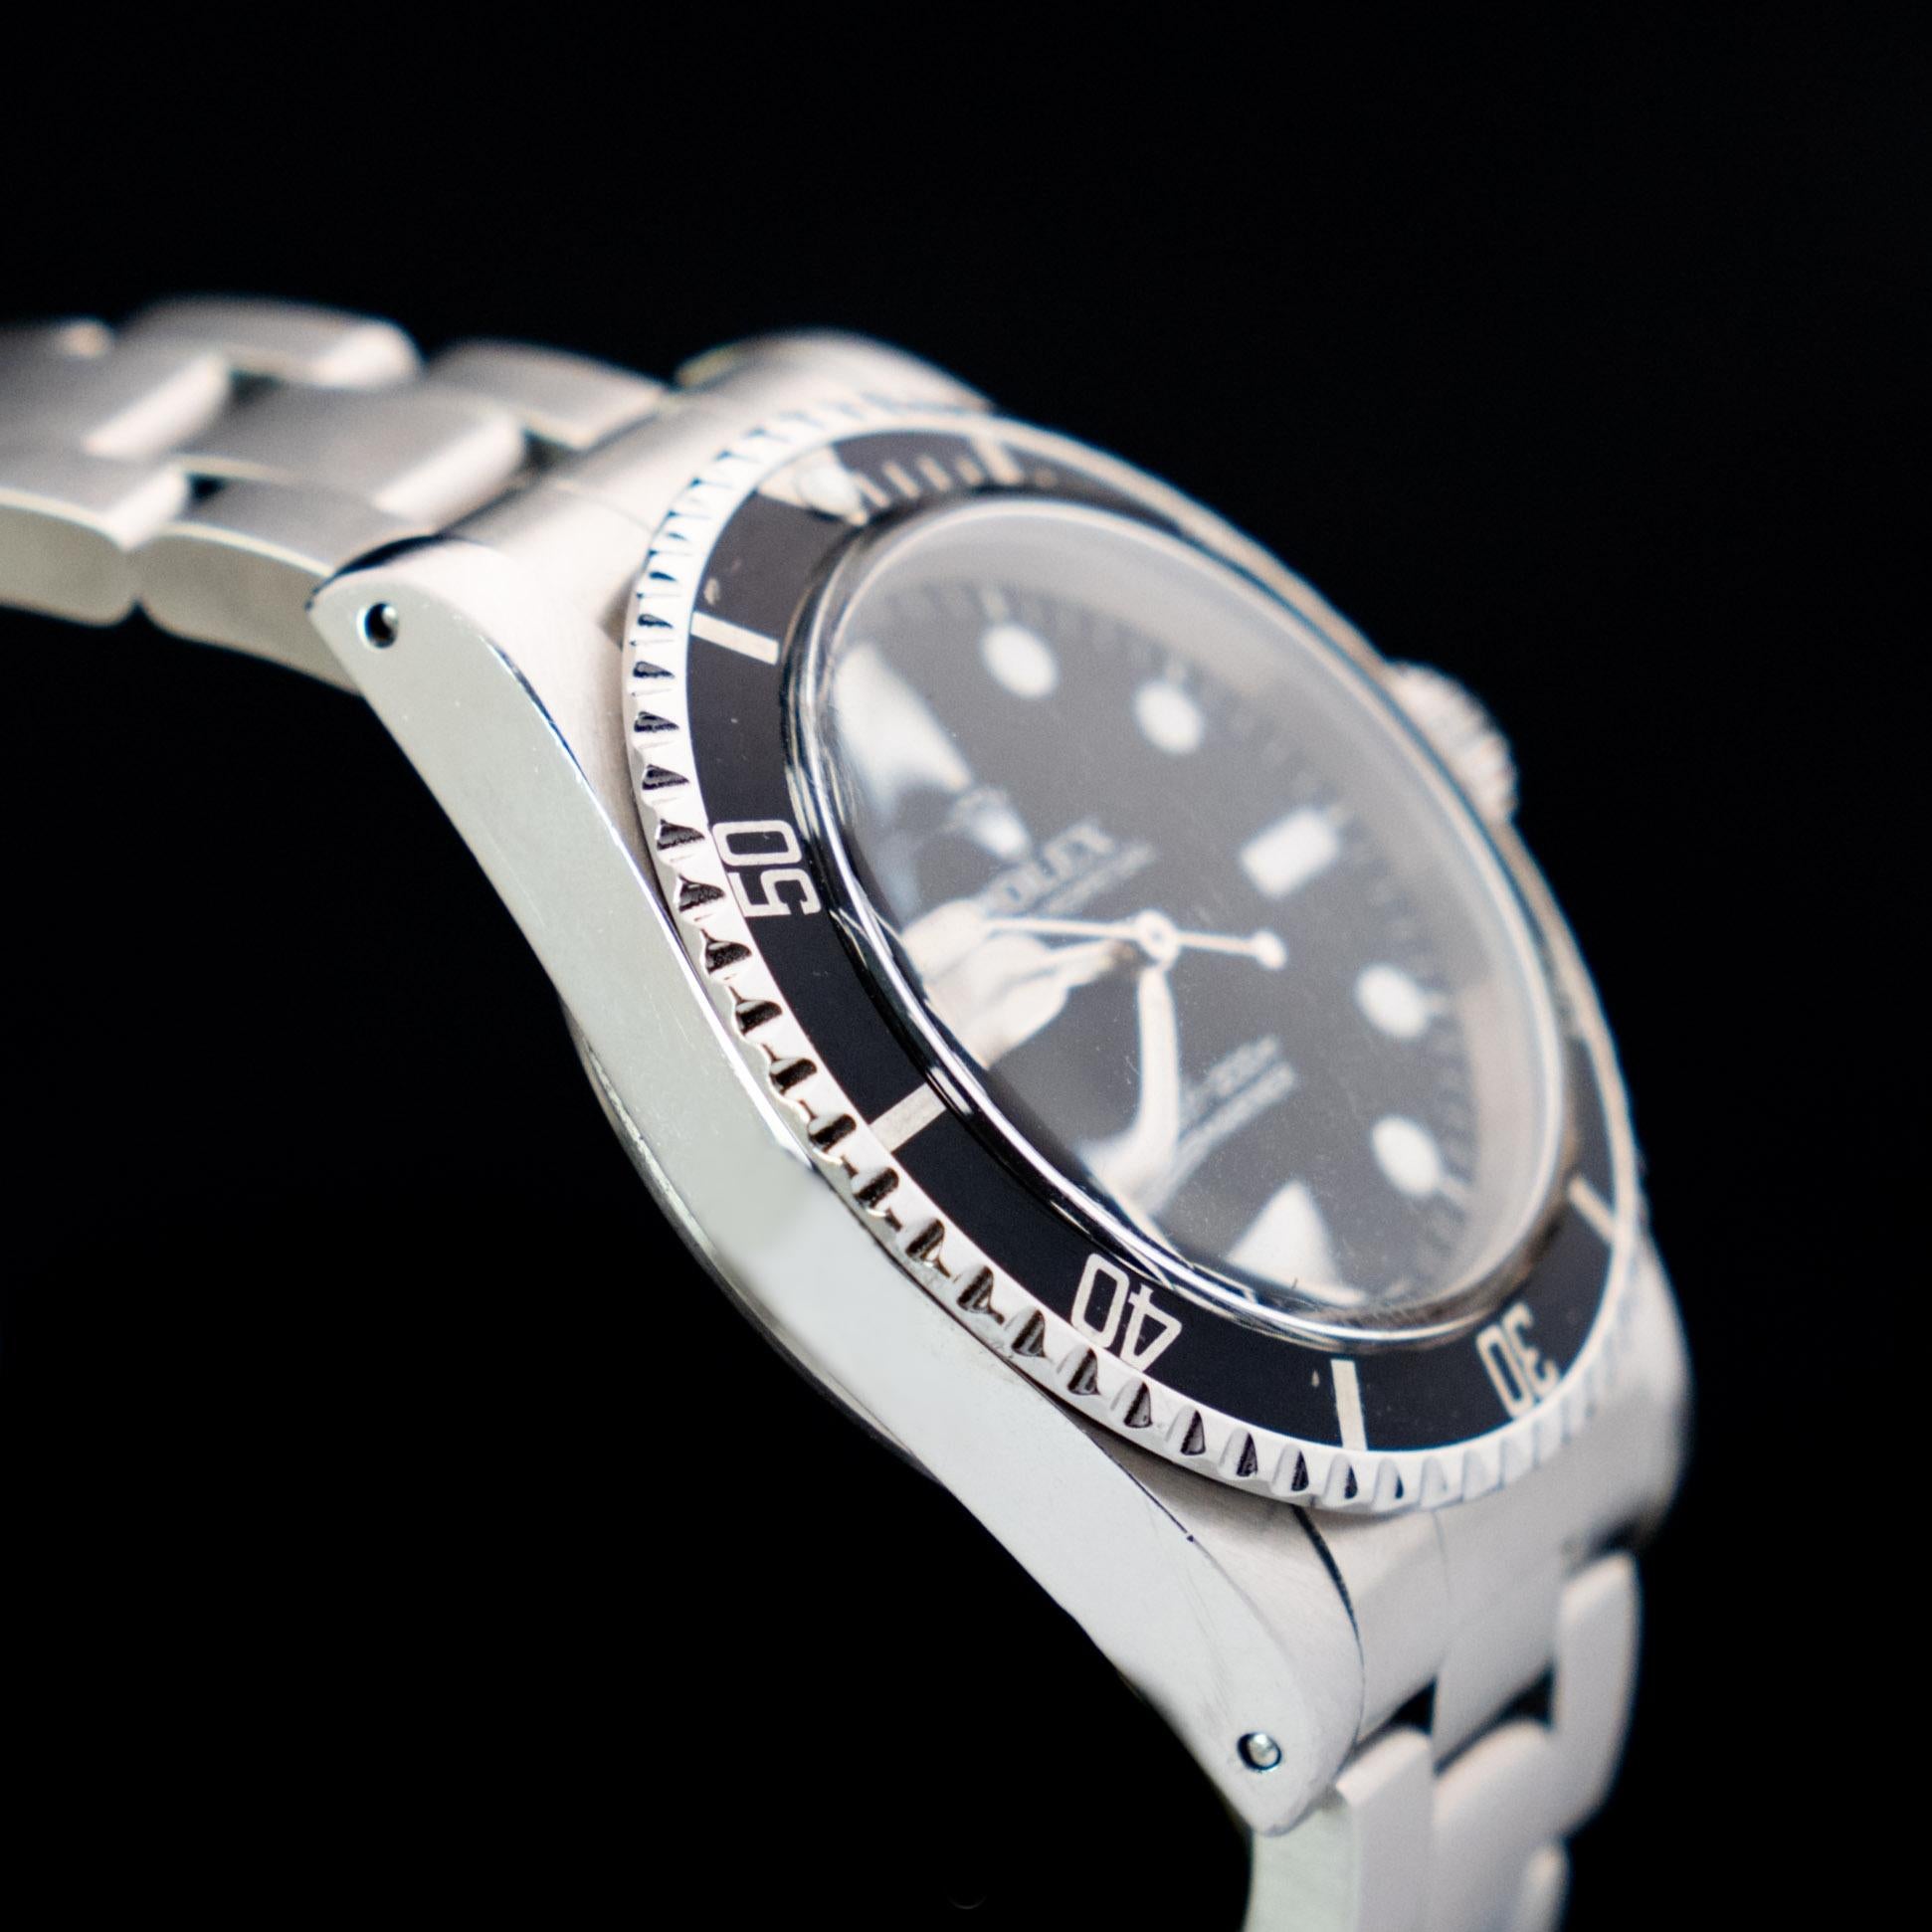 Rolex Steel Submariner Maxi MK I Matte Dial 5513 Steel Automatic Watch, 1978 For Sale 2